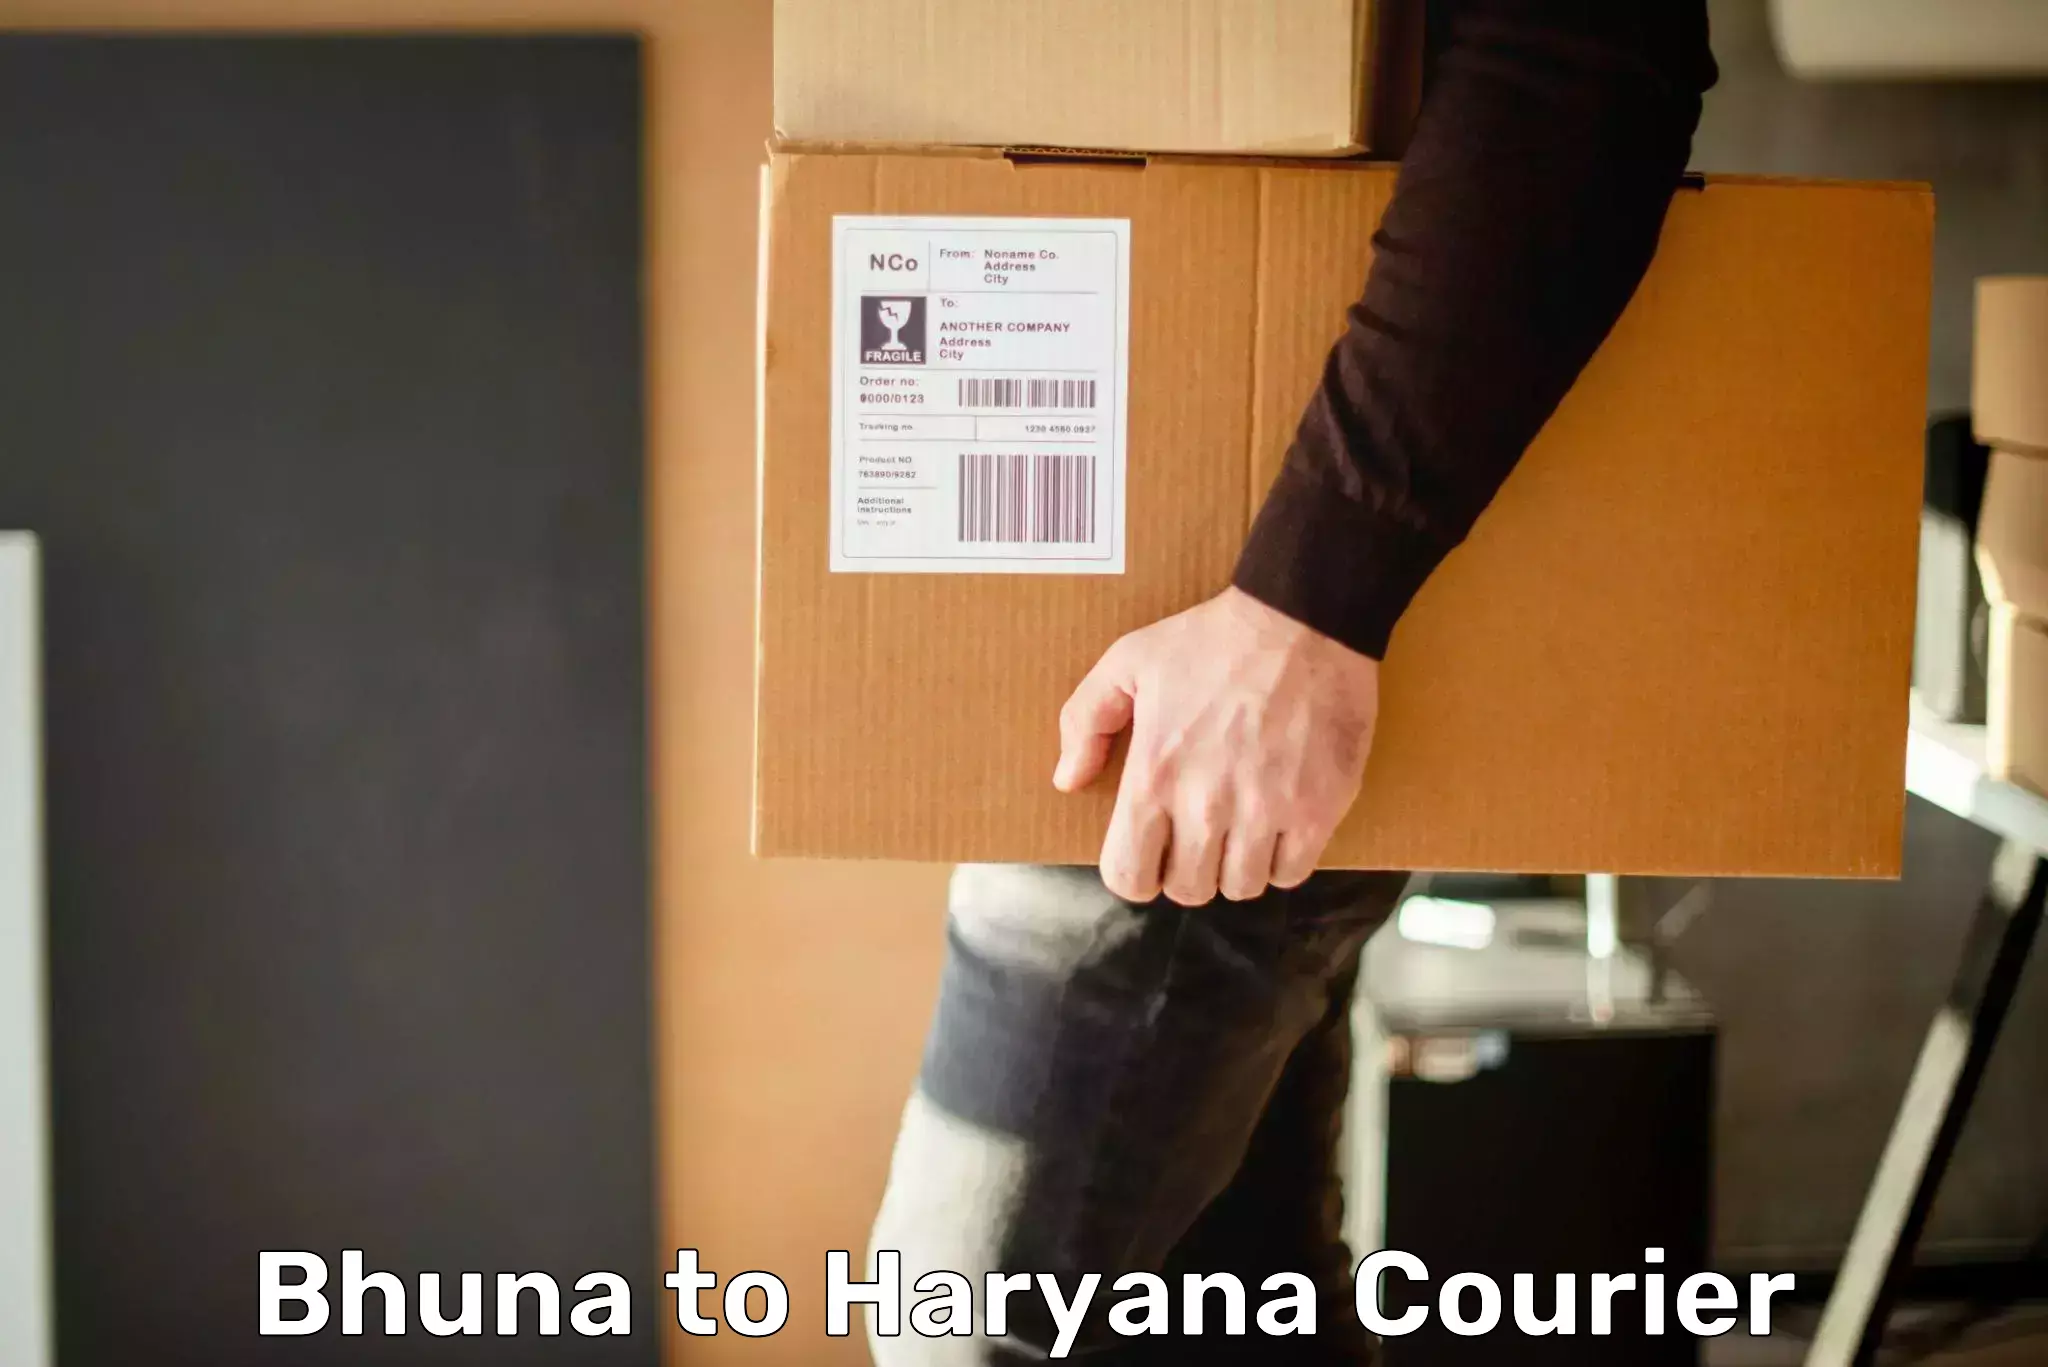 Customizable delivery plans in Bhuna to NCR Haryana